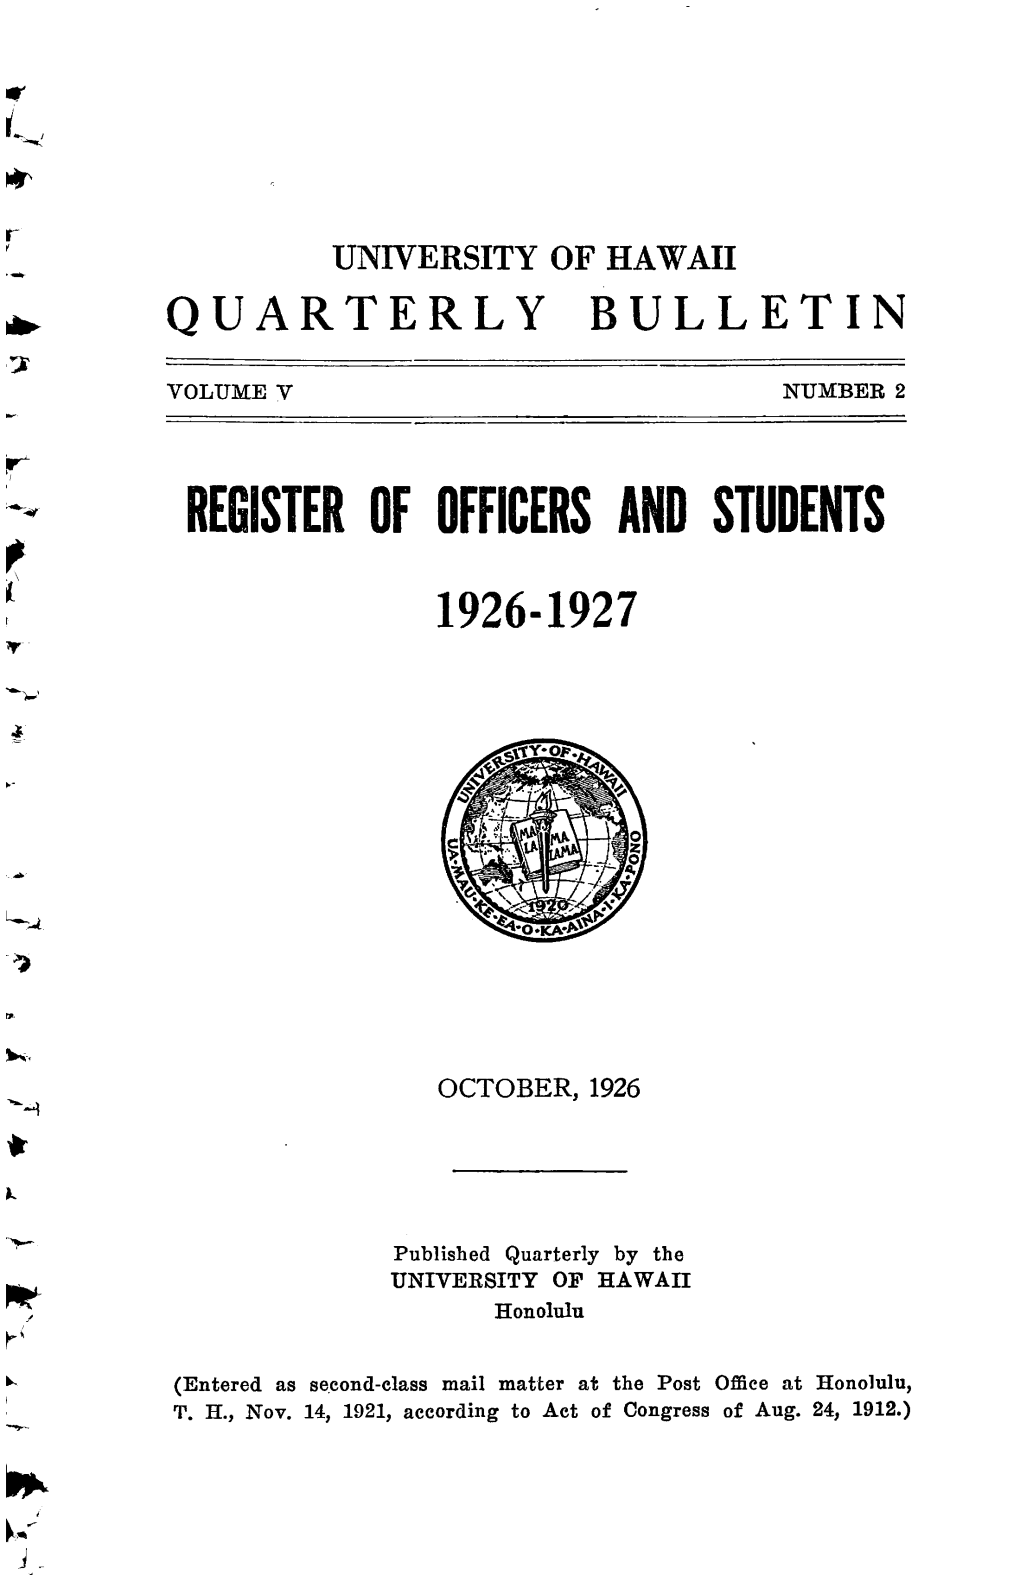 Register of Officers and Students 1926-1927